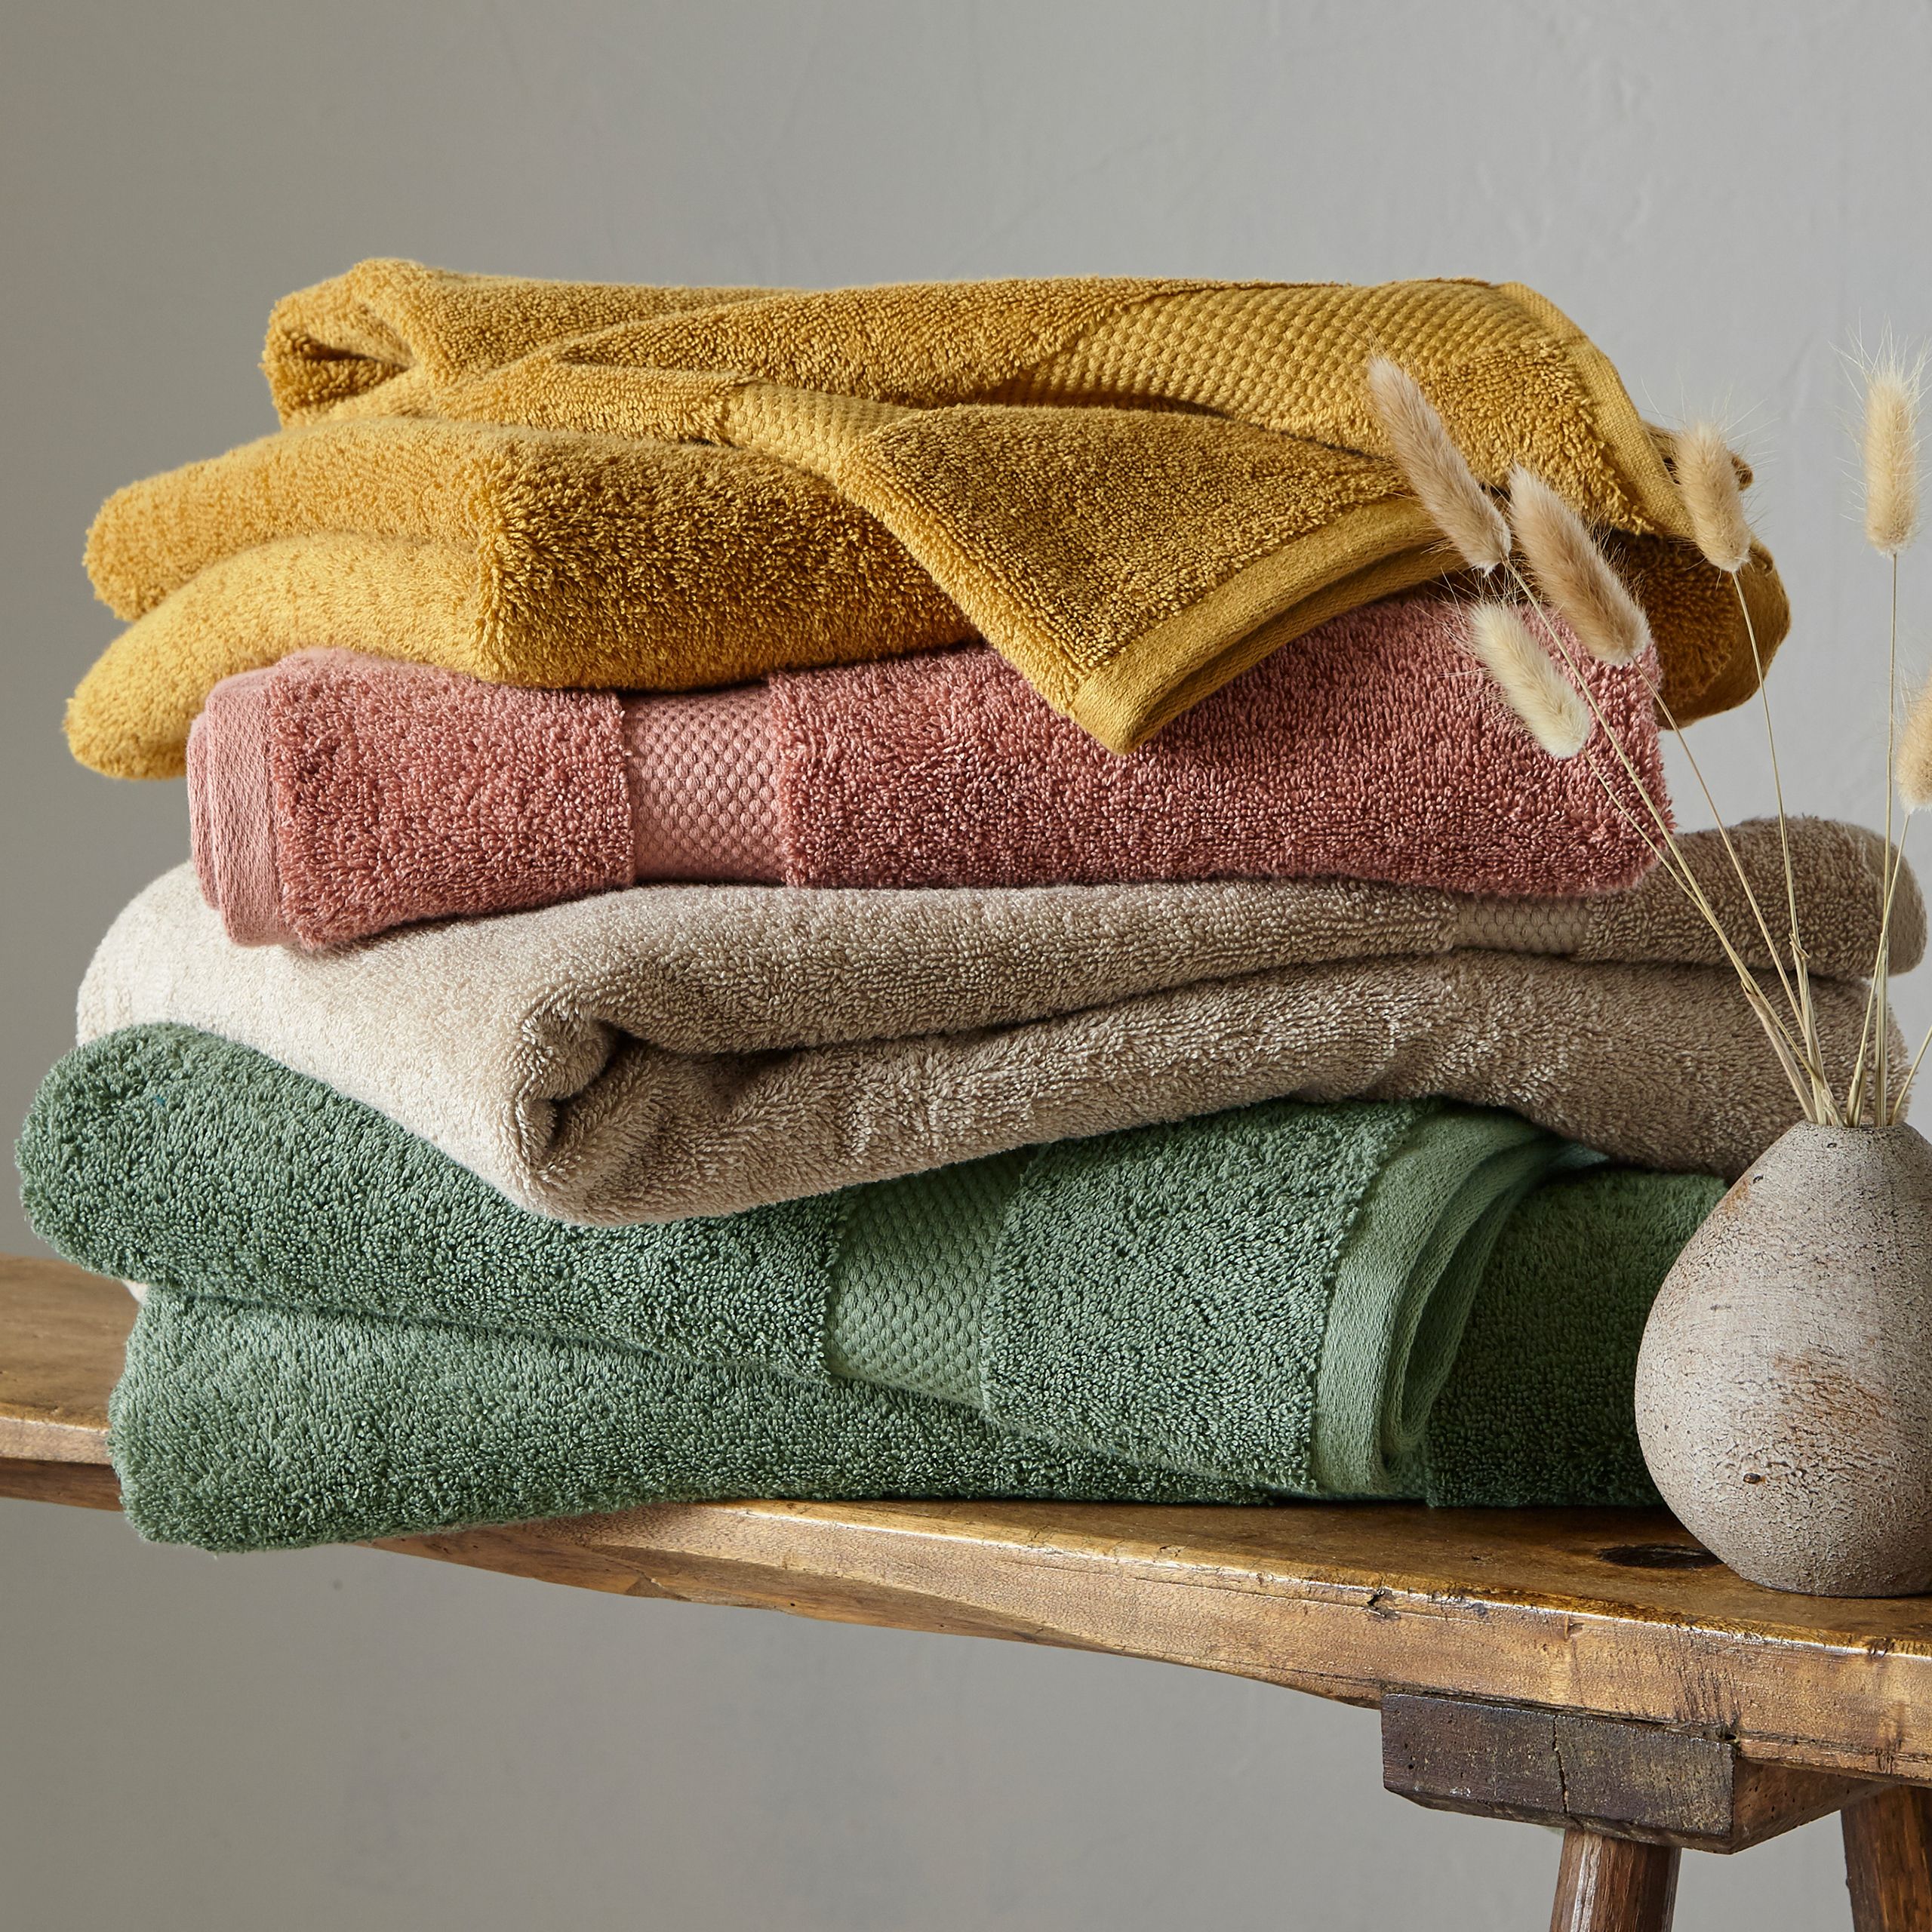 The Linen Yard LOFT collection of face cloths are a must have for your home. They are designed to be super absorbent and are ultra-soft. Made from a 100% plush combed cotton for a relaxed everyday feel. Perfect enveloping heavyweight towels with 650 grams per square metre. The basket weave band is a quality design feature that gives LOFT towels a stylish effortless signature look. In multiple soothing shades, create an air of calm in your washroom and always have super softness on hand.